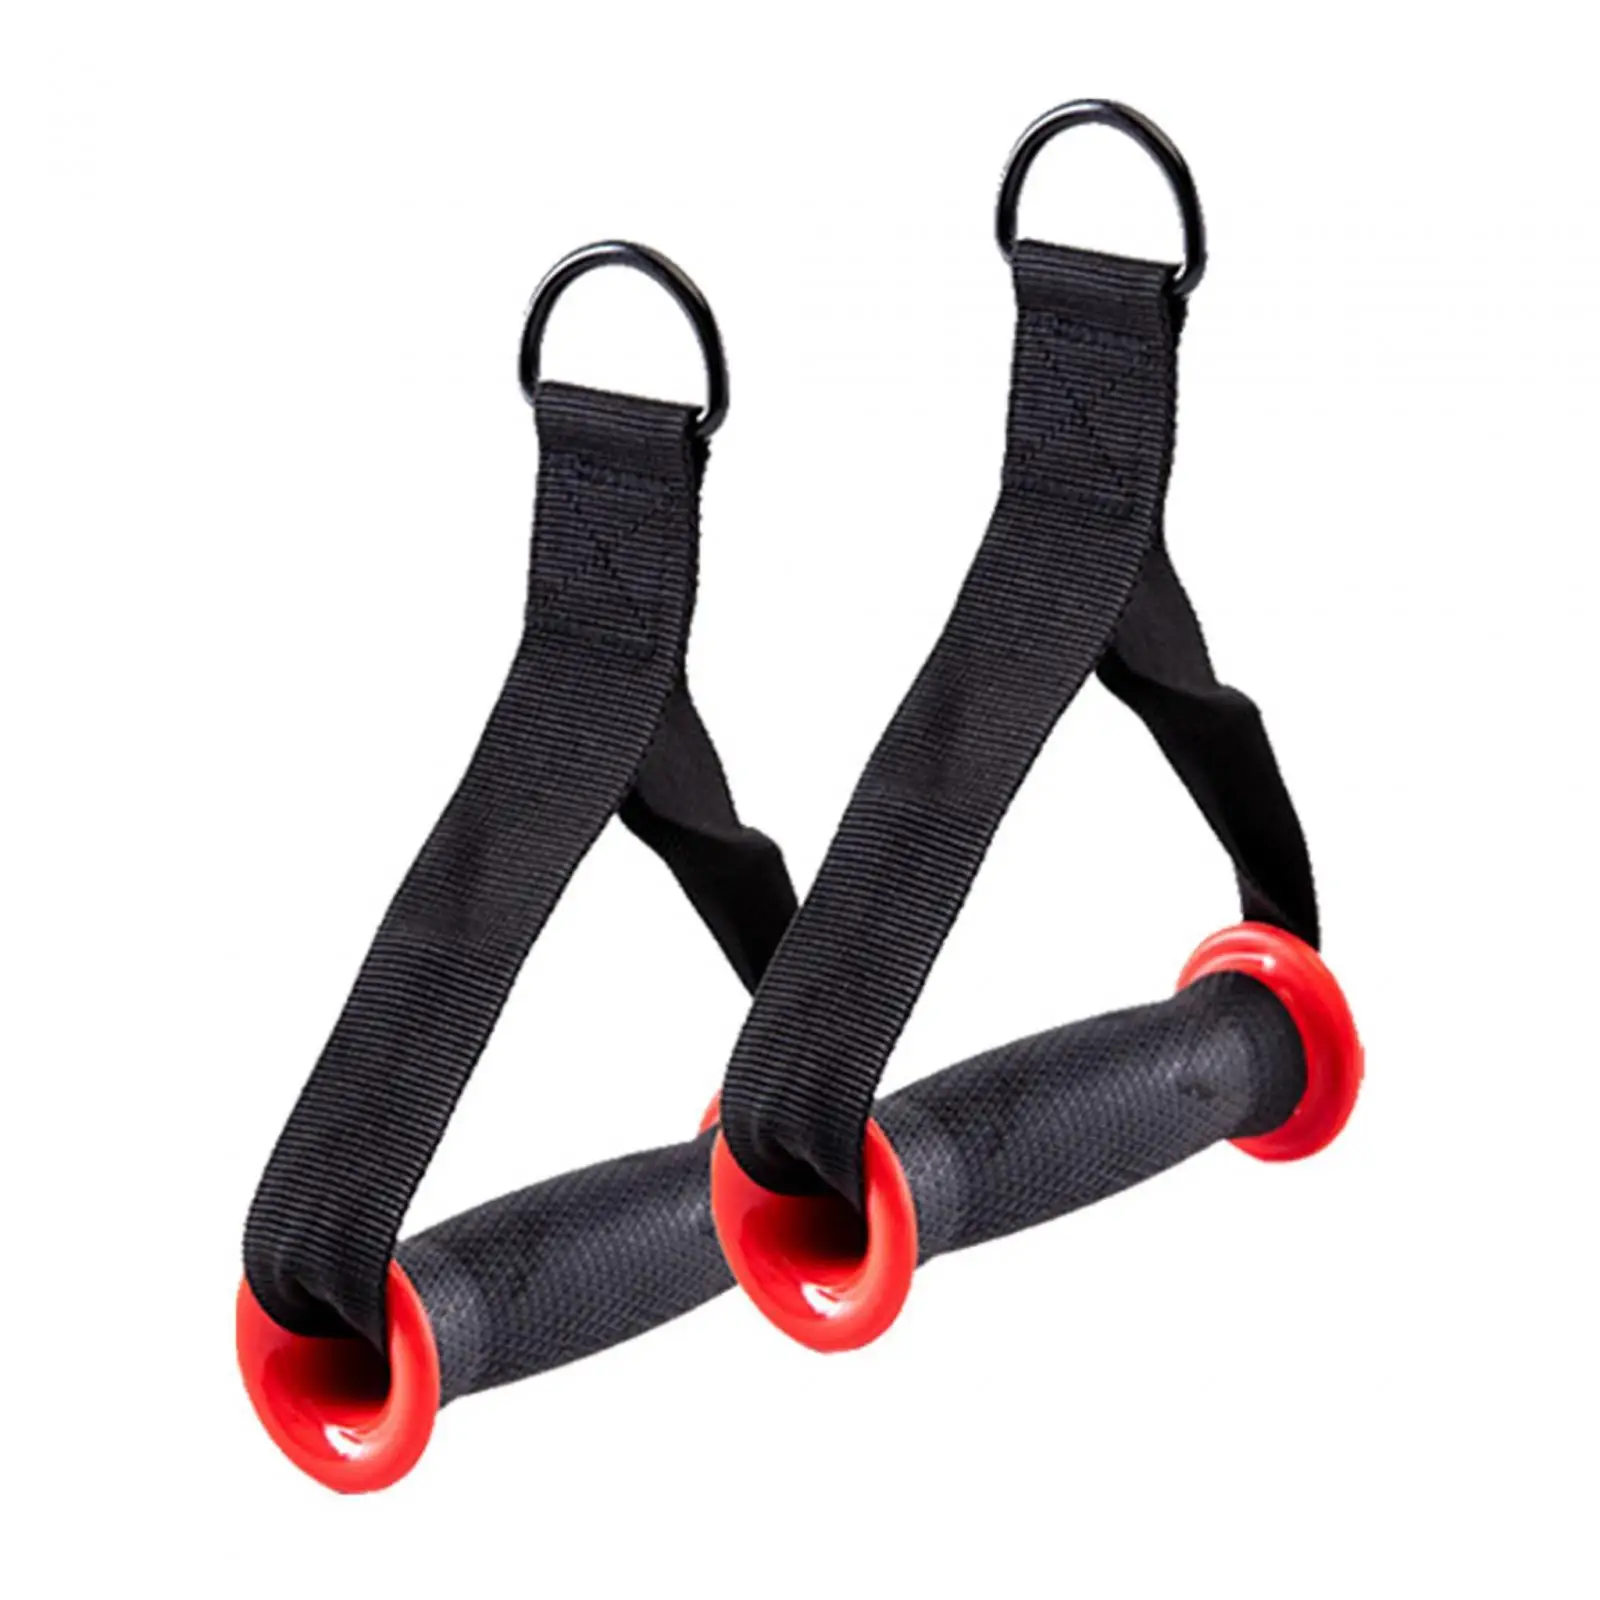 2x Gym Handle Nylon Webbing Gymnastics Hanging Universal Replacement Grips Accessories Tricep Rope Press Handles Fitness Straps